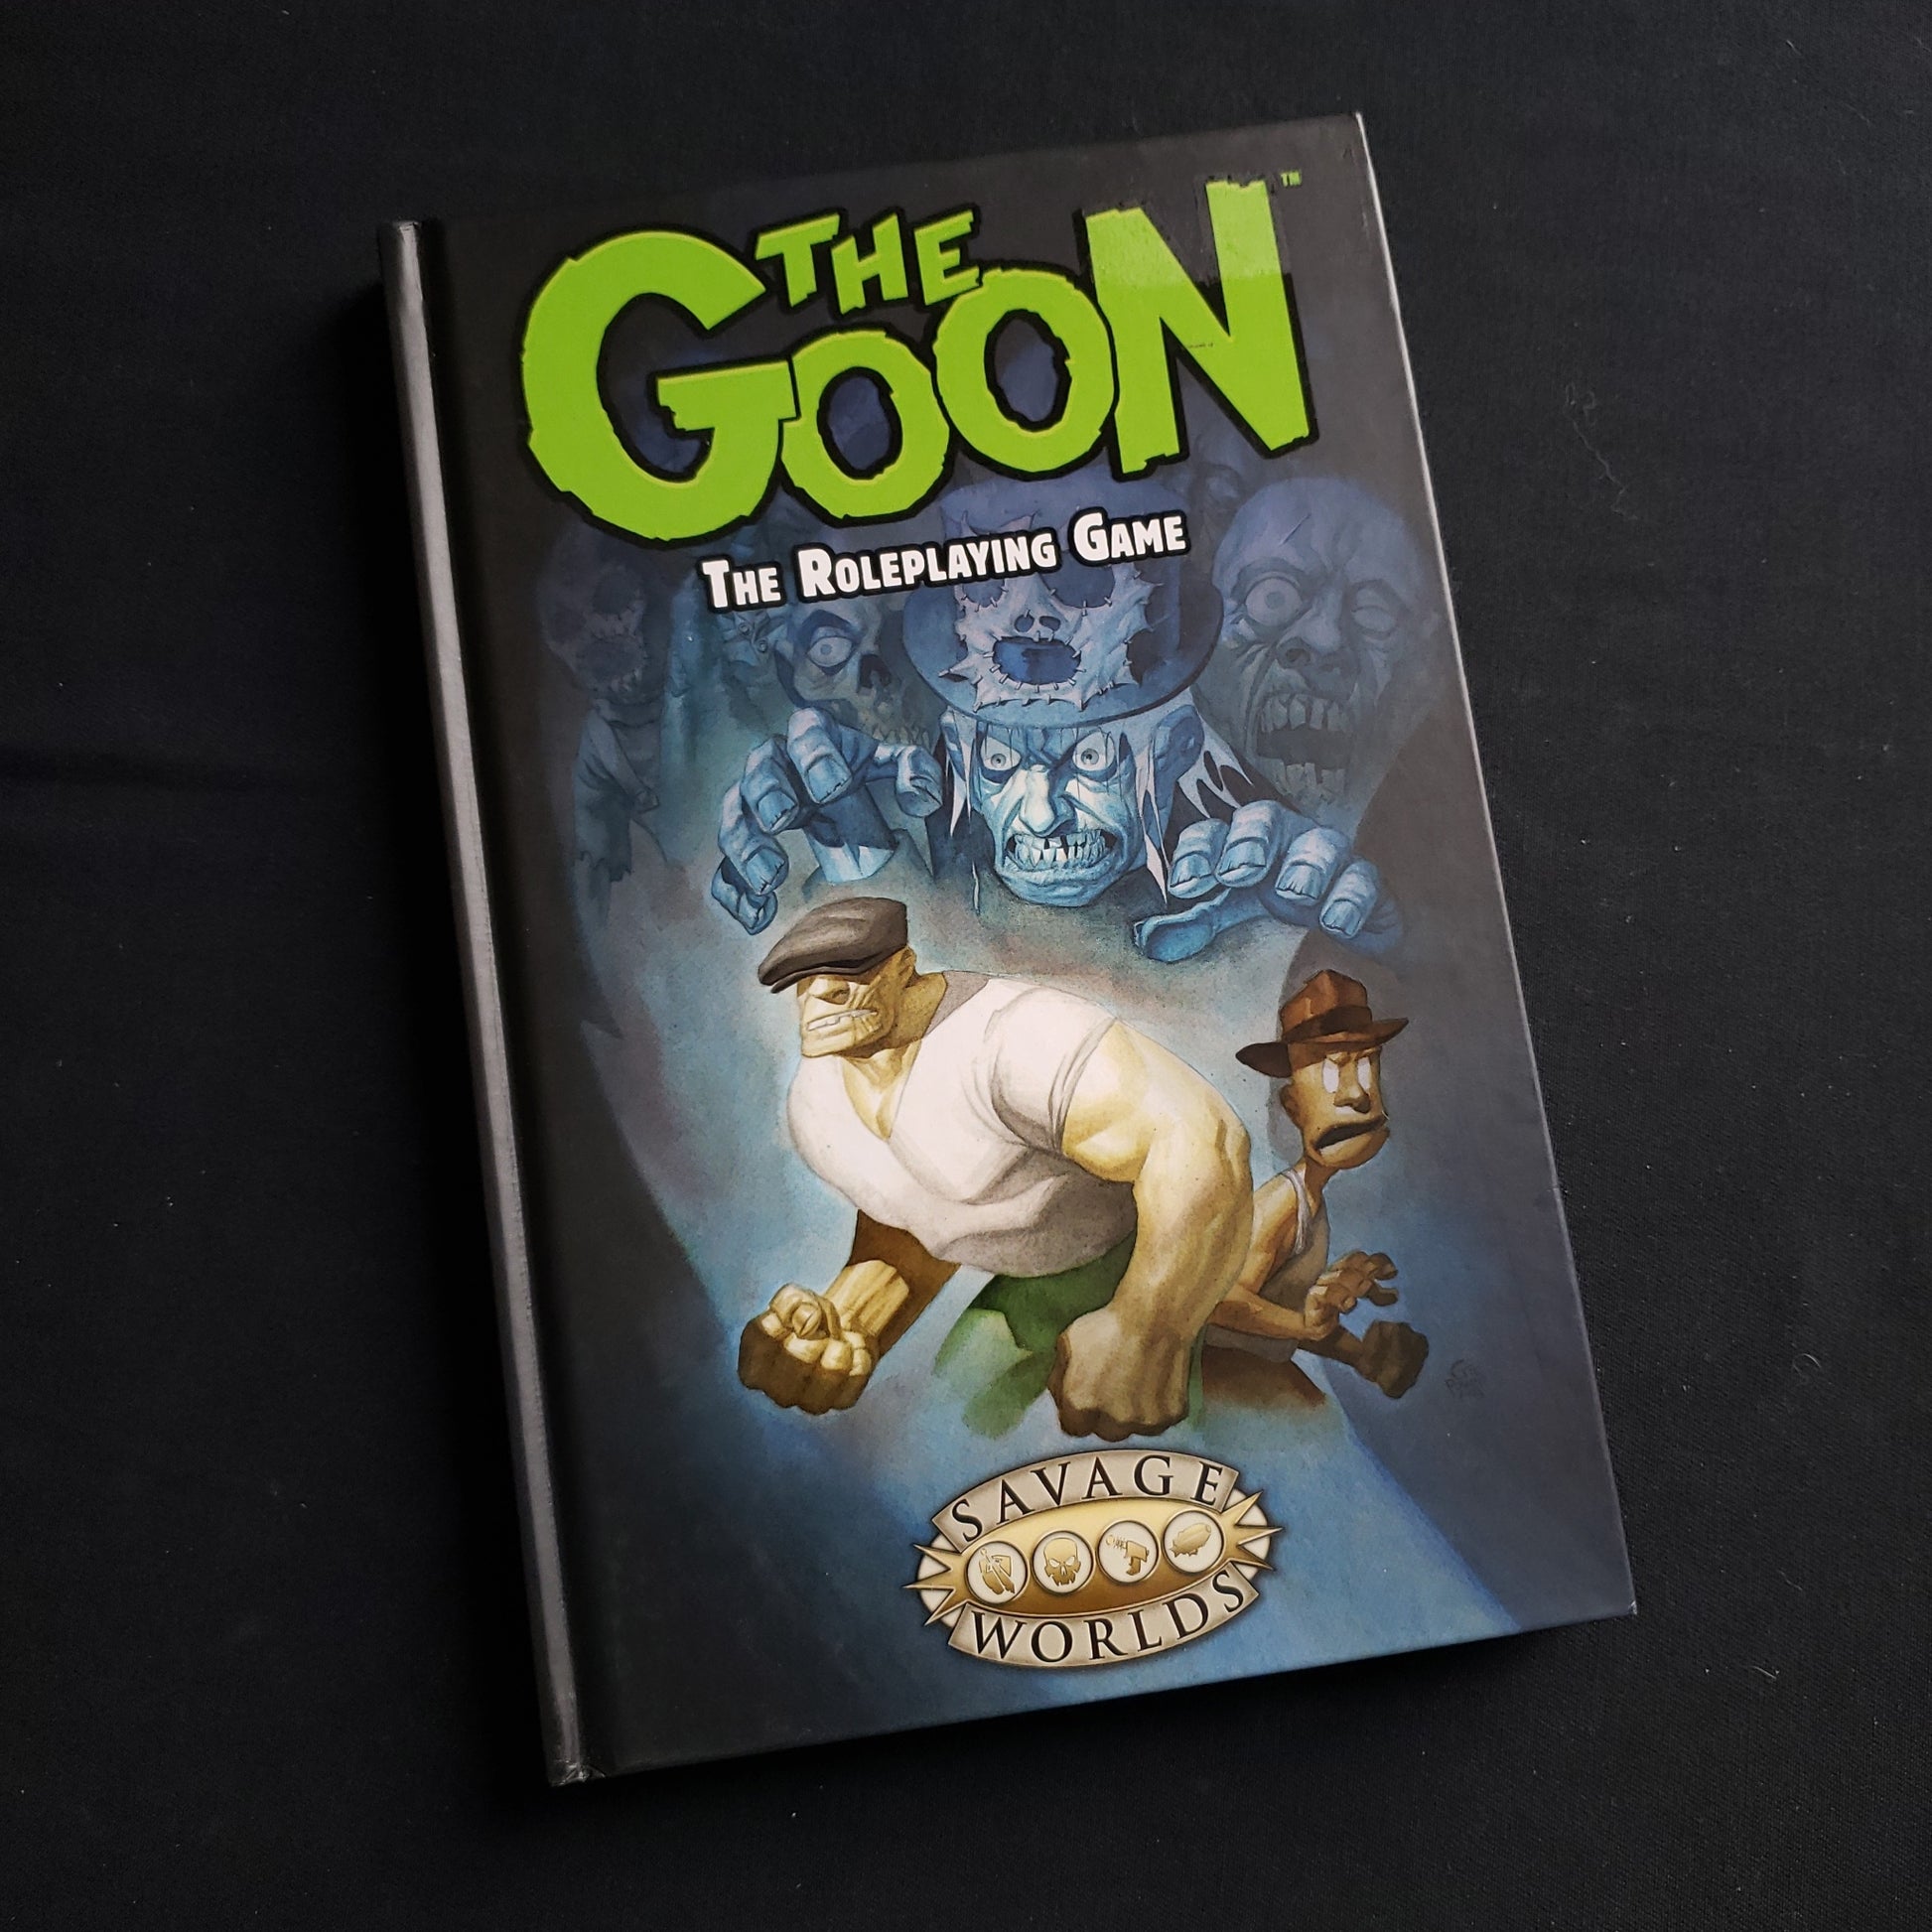 Image shows the front cover of the Goon roleplaying game book